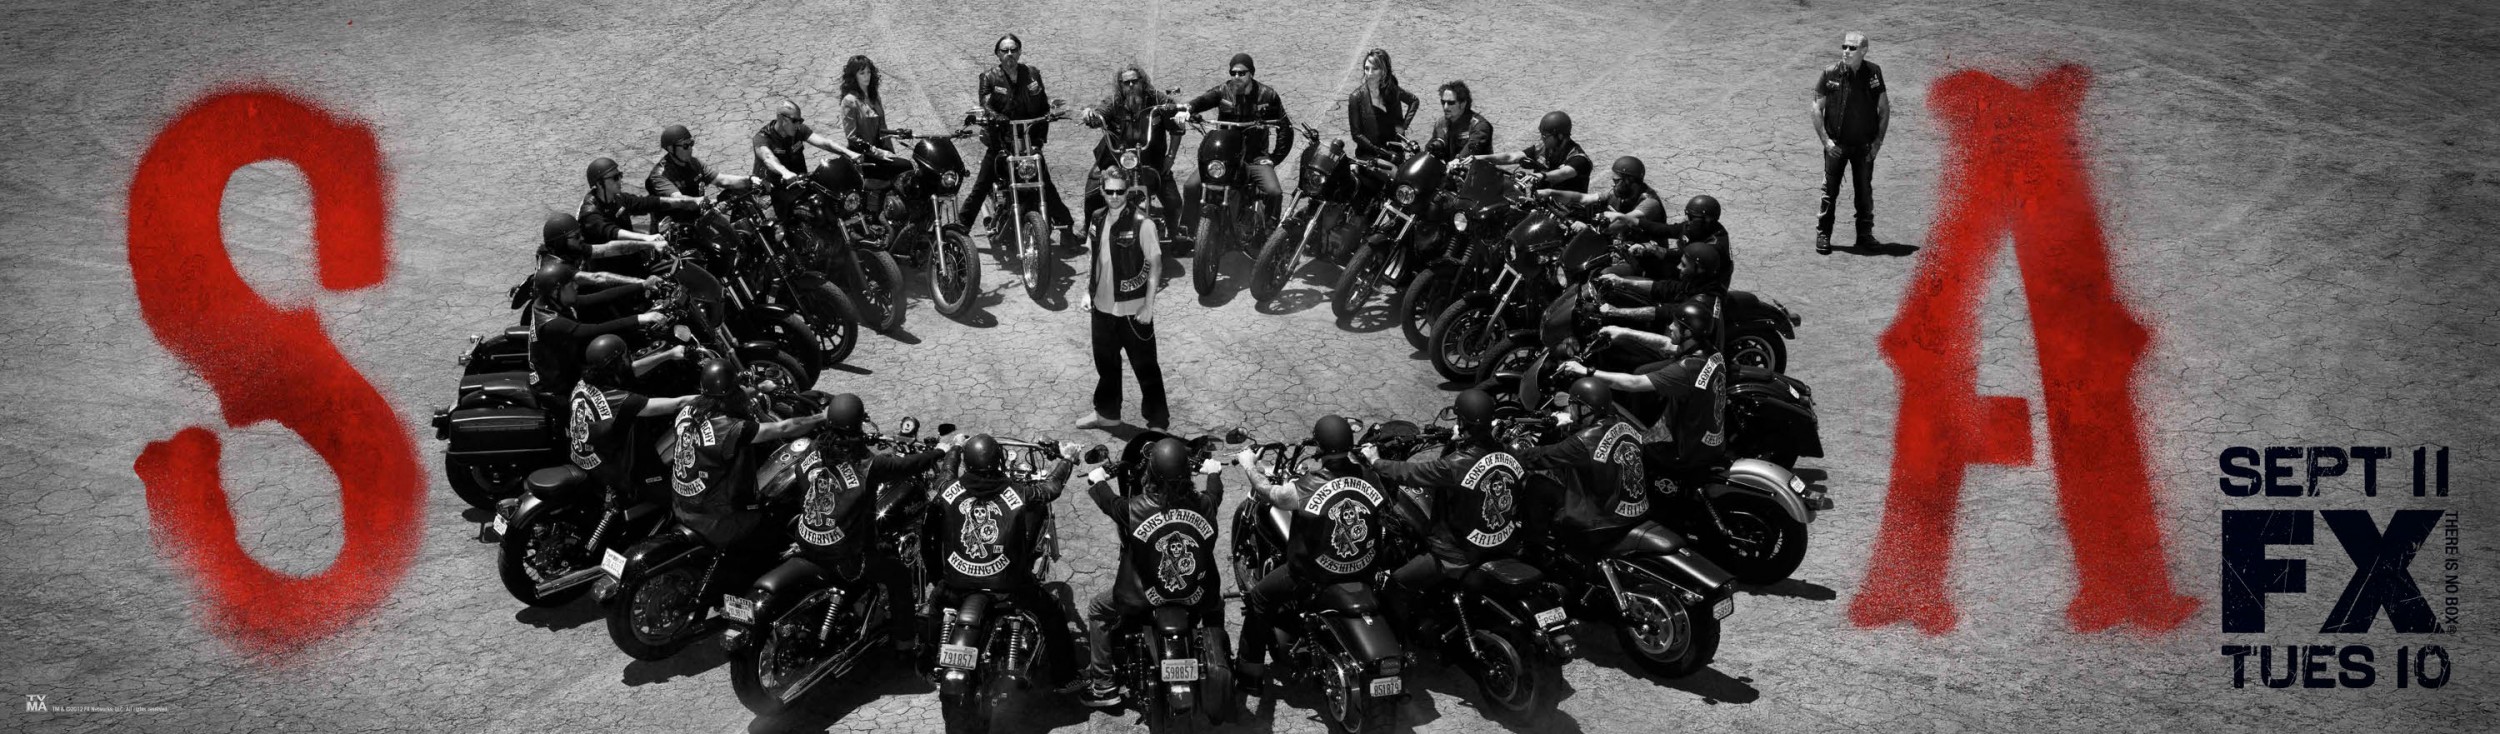 Mega Sized TV Poster Image for Sons of Anarchy (#14 of 24)